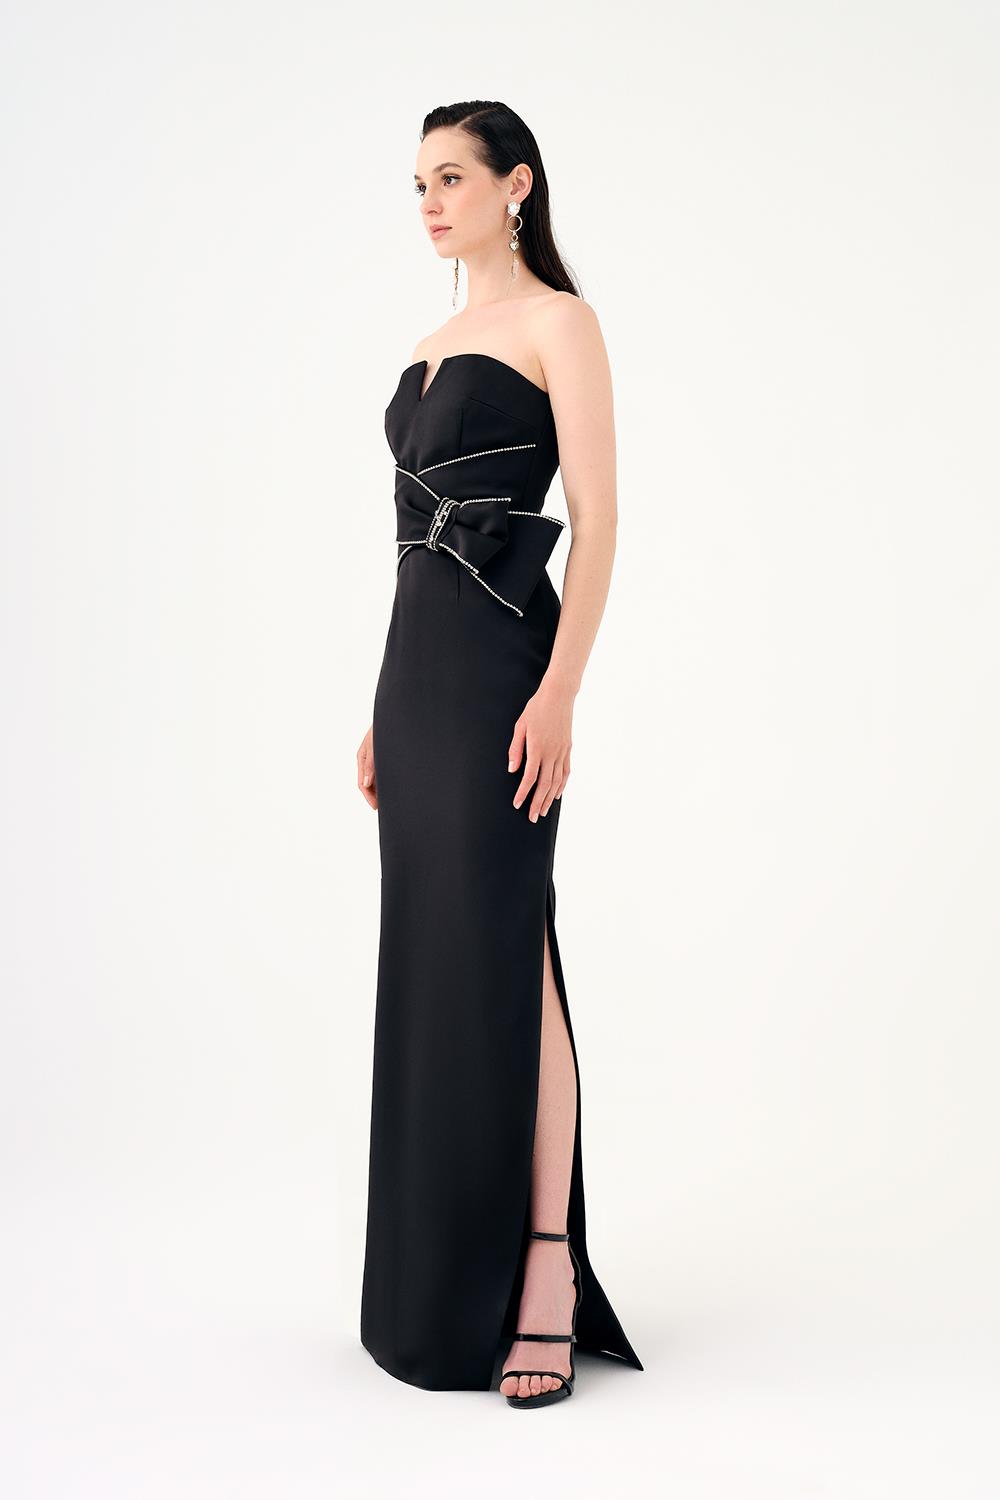 Stone Embroidery Detailed Strapless Collar Long Evening Dress